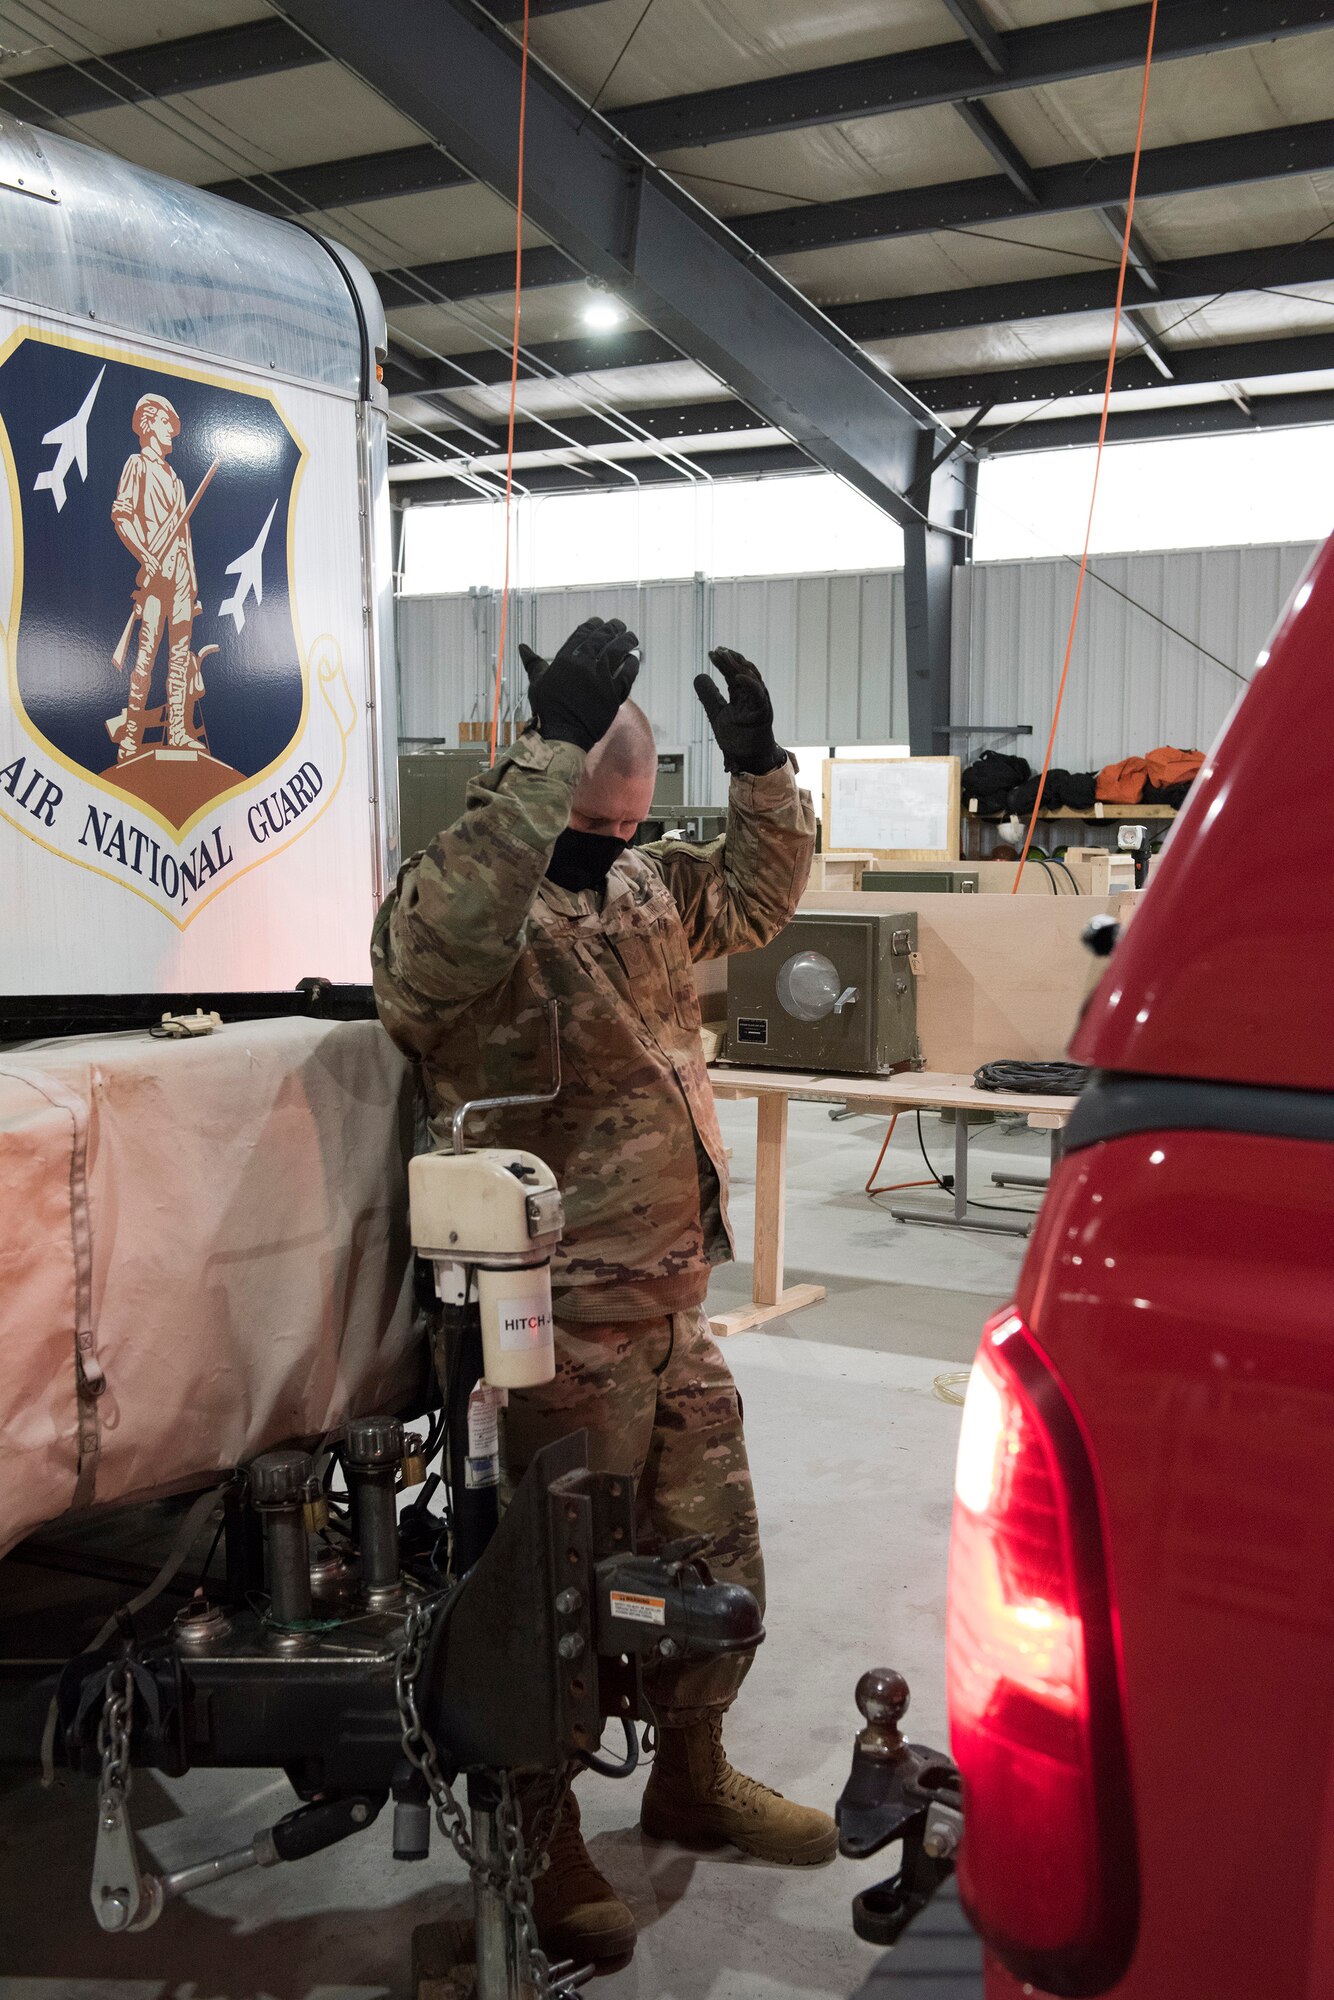 Tech. Sgt. Michael Lengle hooks up the Disaster Relief Mobile Kitchen Trailer to a vehicle in preparation to support service members in the D.C. area for the 59th Presidential Inauguration